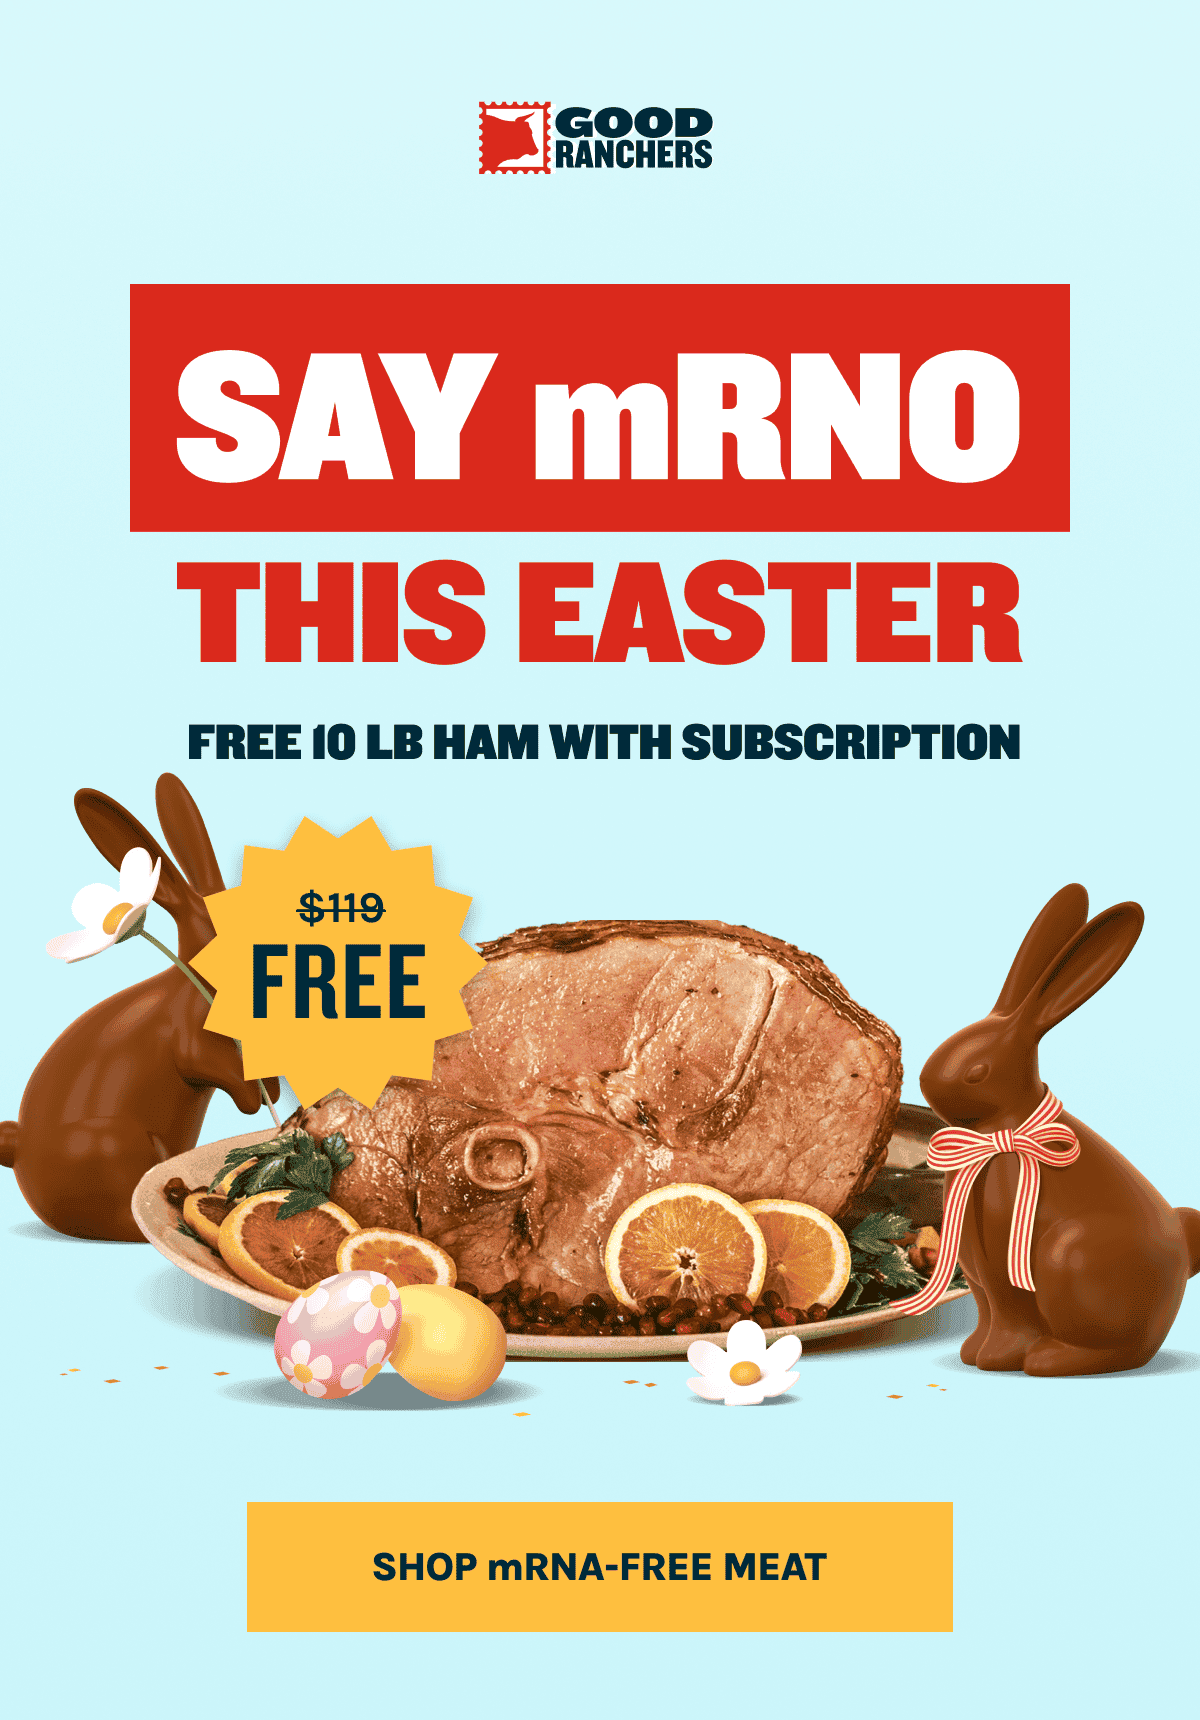 Say mRNO this Easter - Subscribe & Get a FREE 10lb Ham